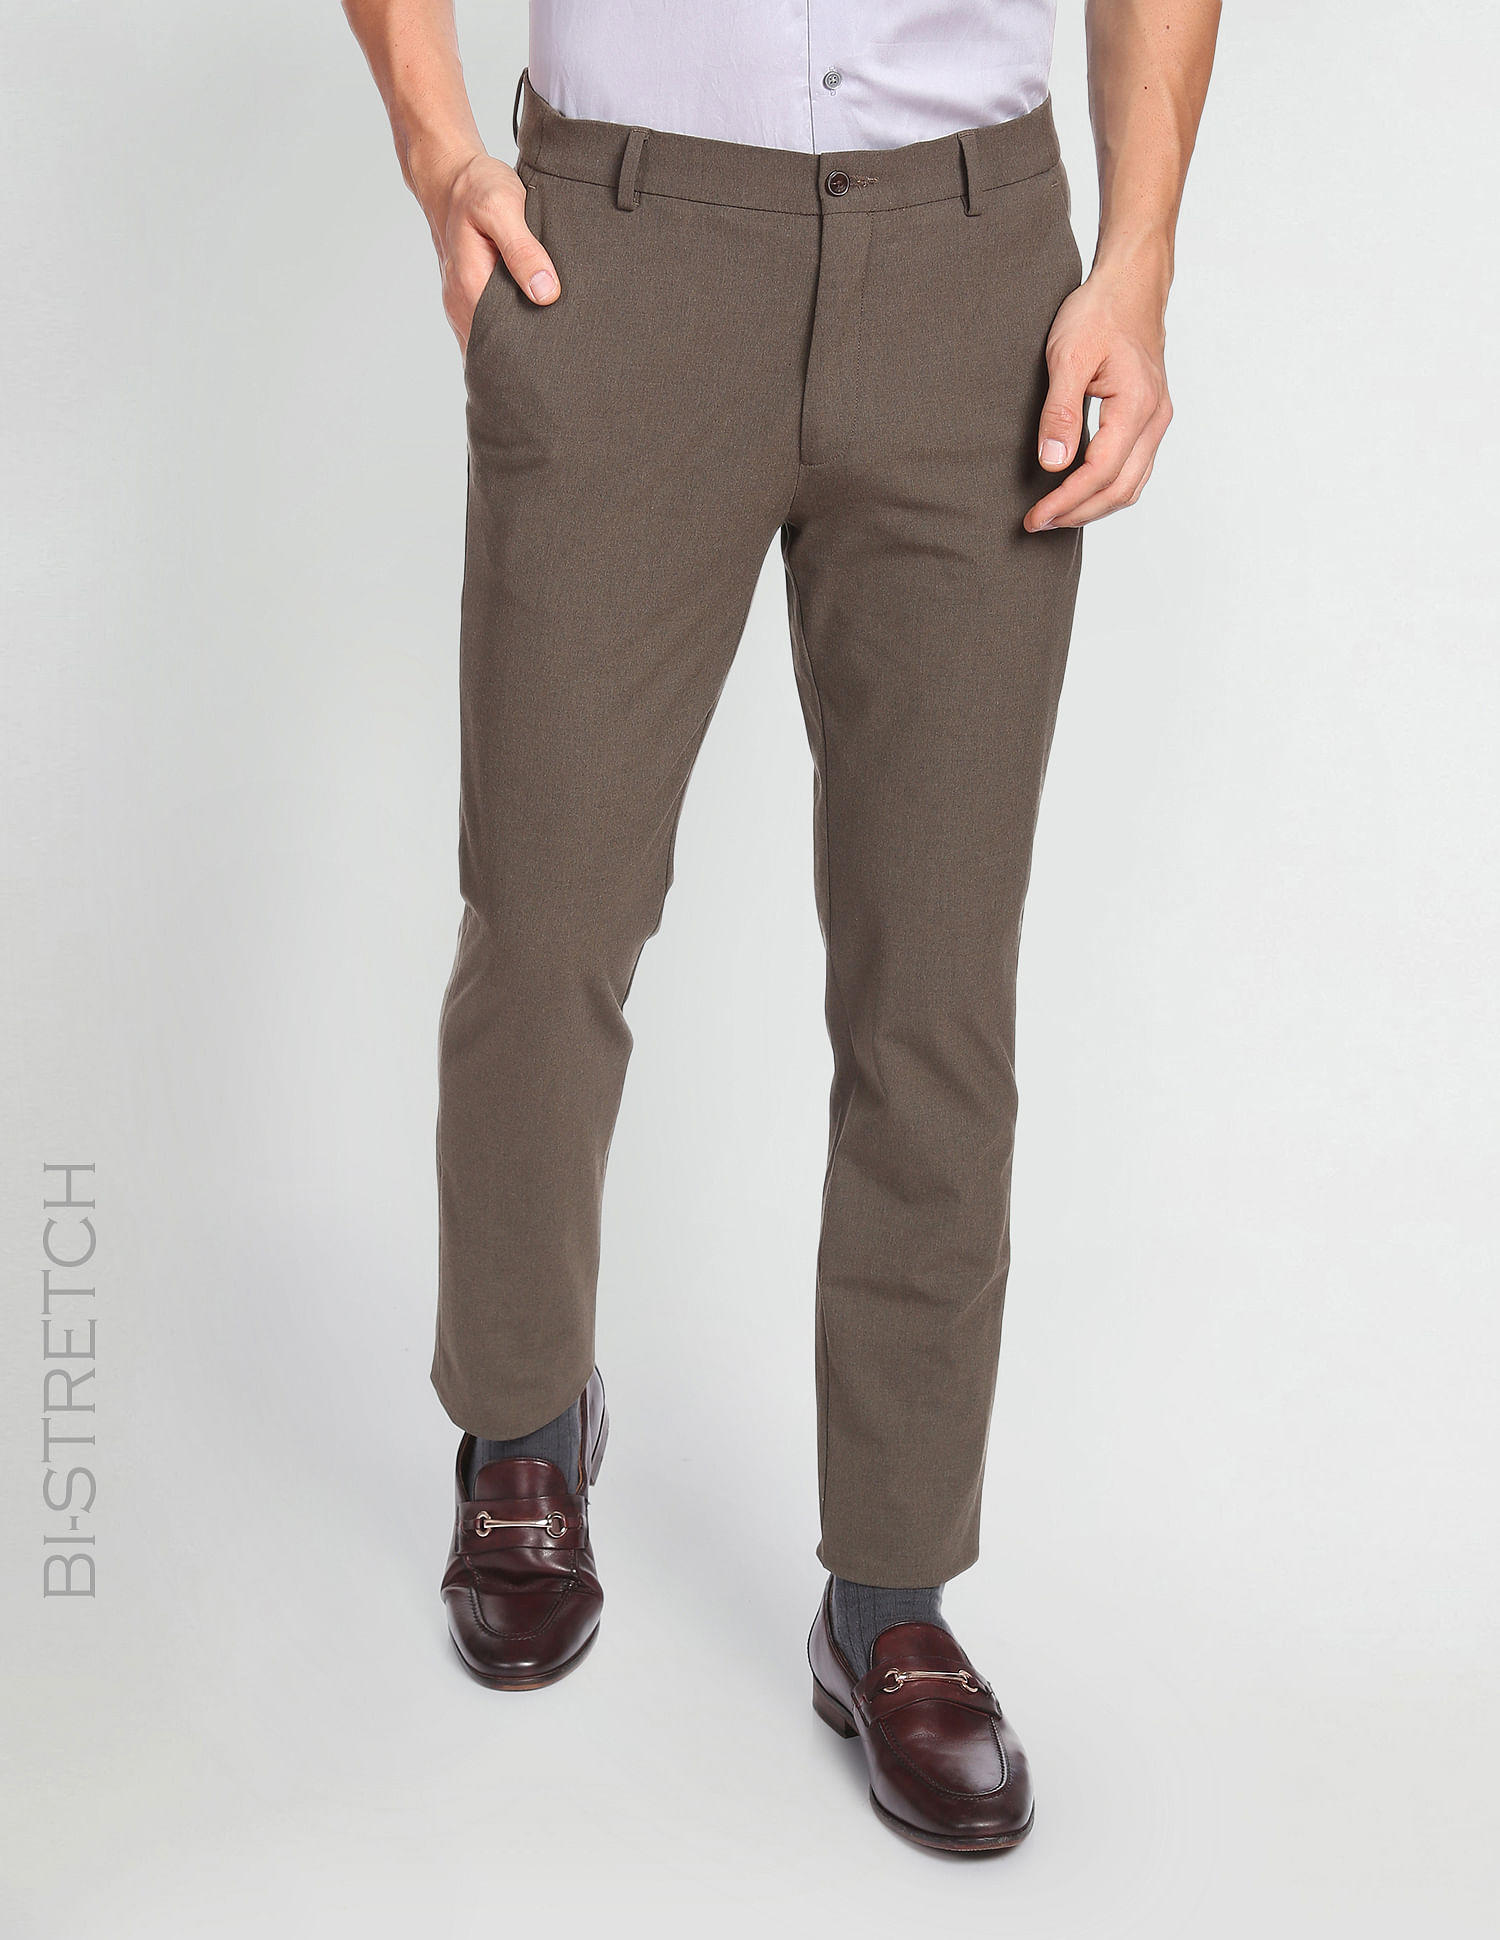 Buy Arrow New York Olive Slim Fit Trousers for Mens Online @ Tata CLiQ